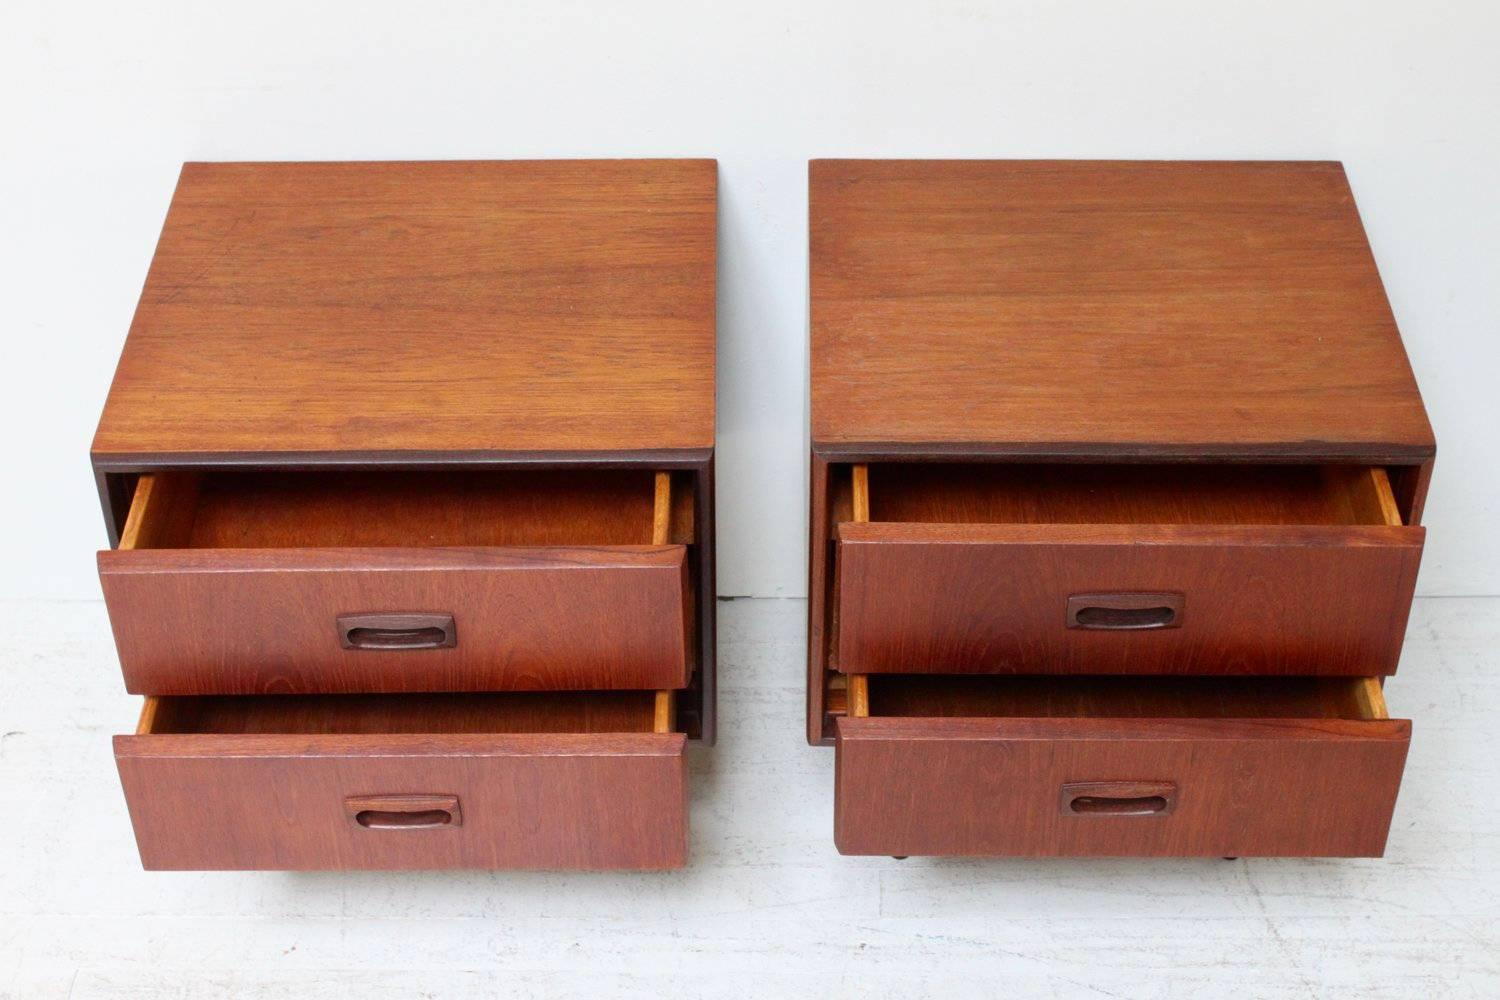 Canadian modern nightstands by The Punch Group. Teak legs and teak cases.